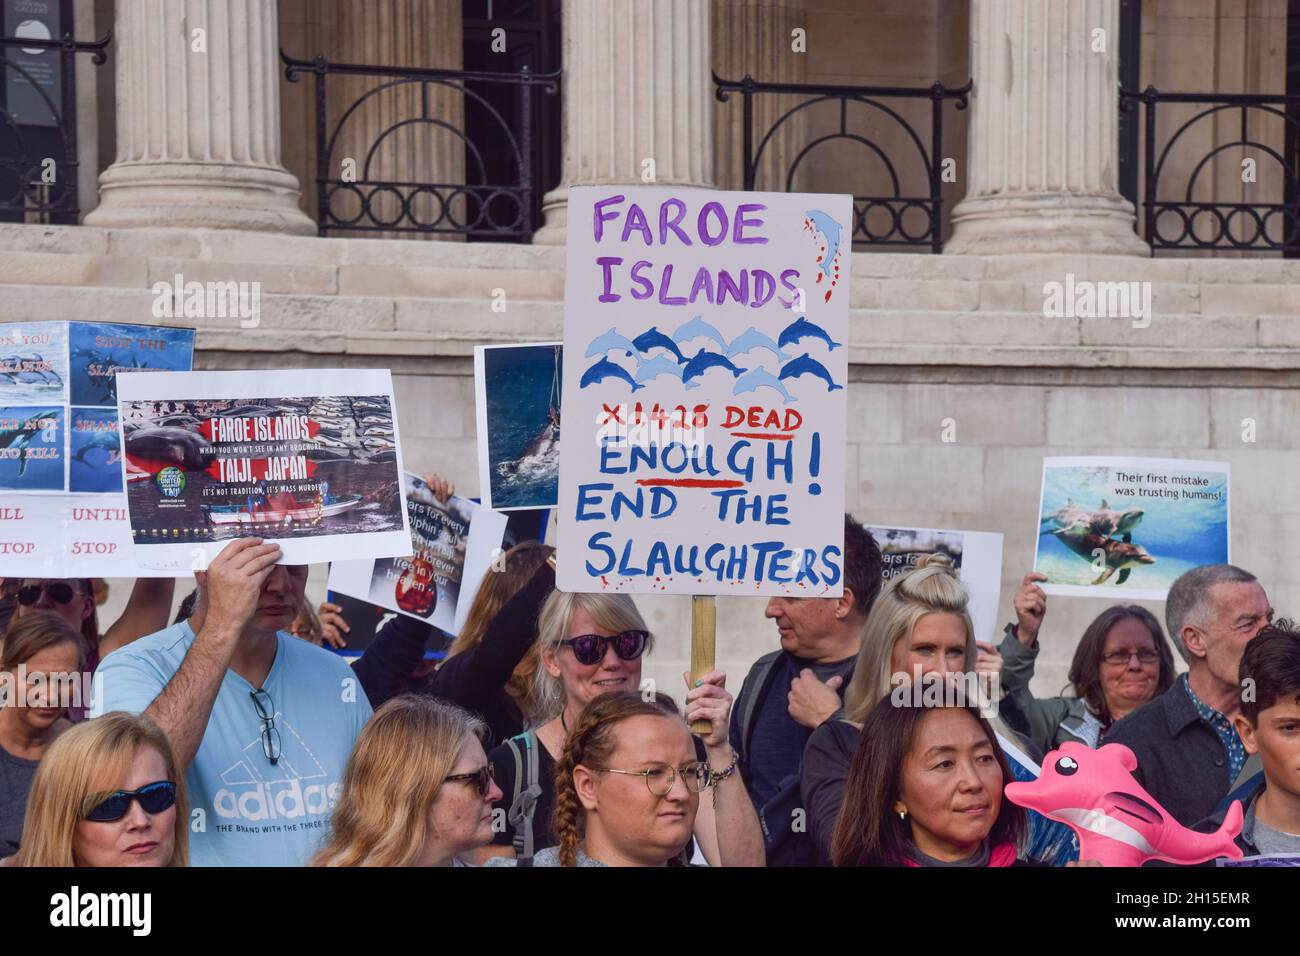 London, UK. 16th Oct, 2021. Protesters hold placards calling for an end to dolphin hunts during the demonstration in Trafalgar Square.Members of marine conservation organization Sea Shepherd and other activists marched through Westminster, calling for an end to the slaughter of dolphins in Faroe Islands and Taiji, Japan. Credit: SOPA Images Limited/Alamy Live News Stock Photo